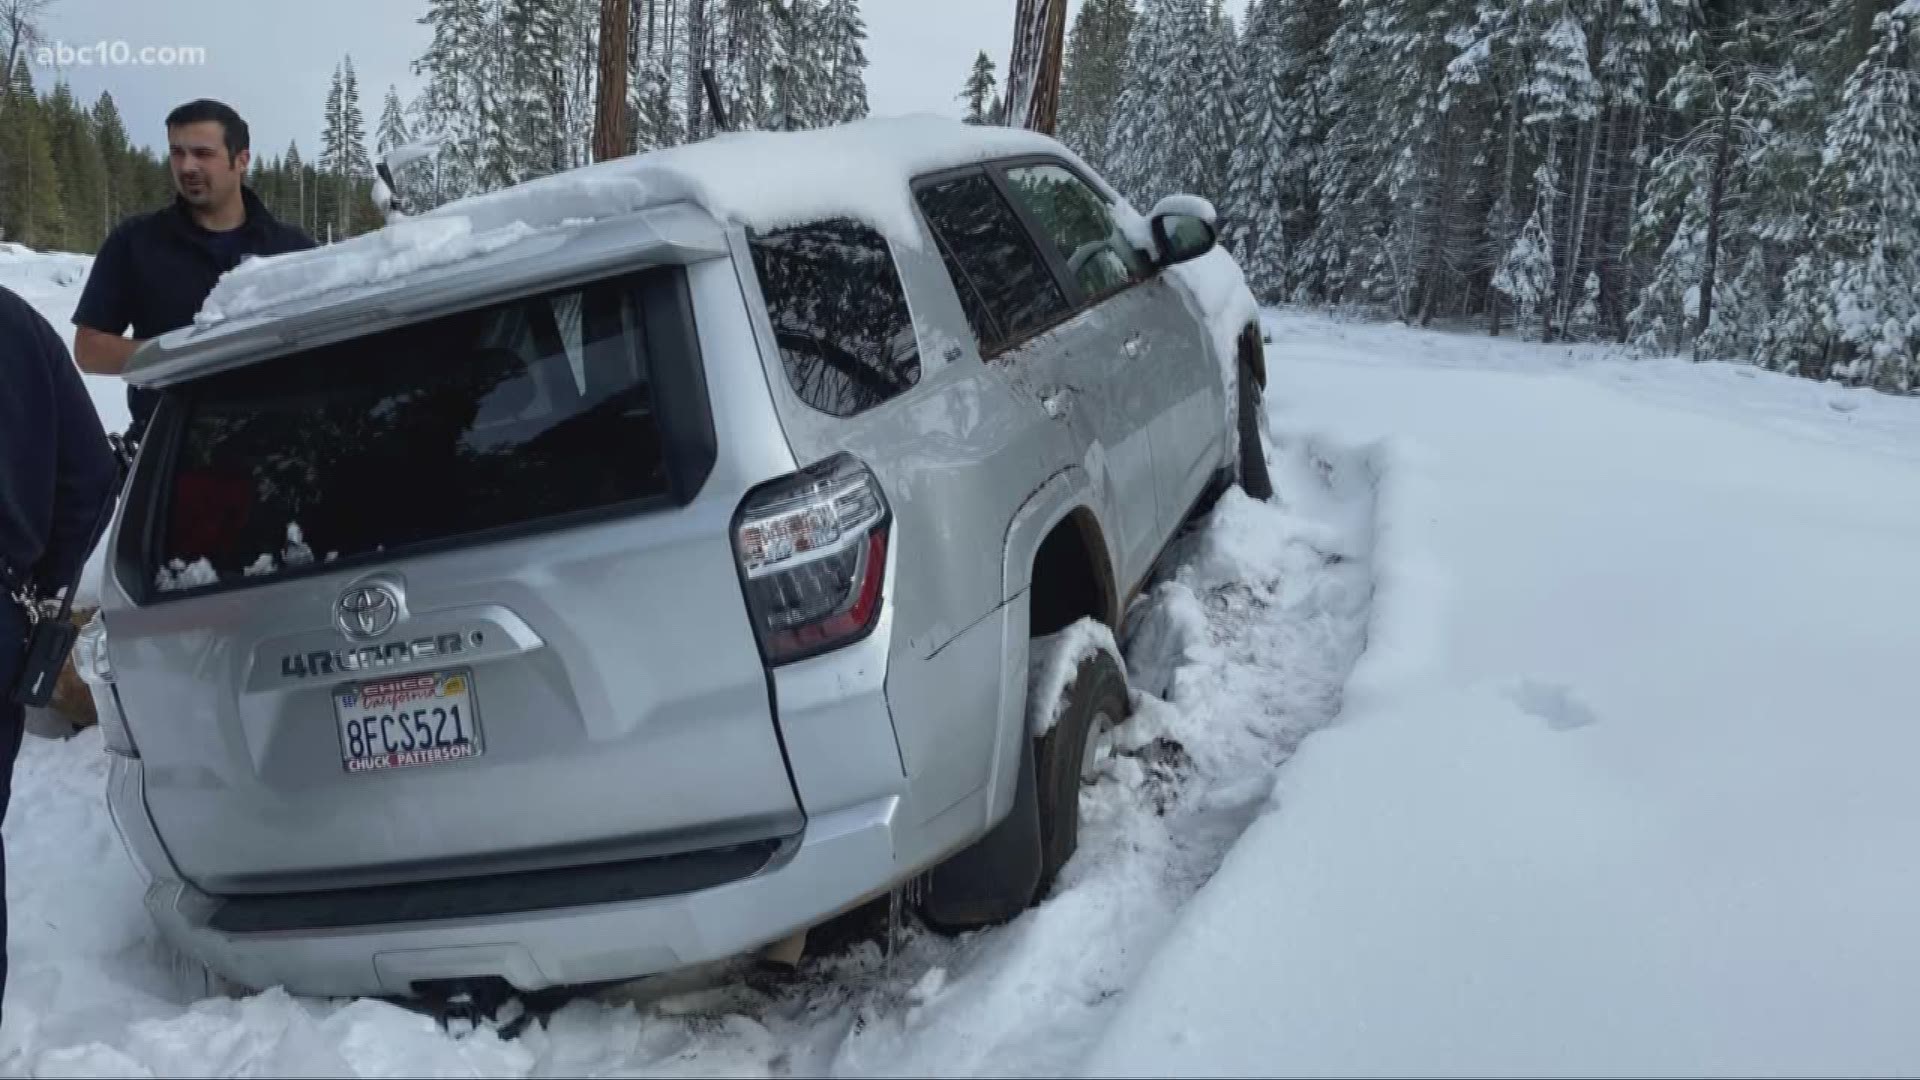 Paula Beth James, 68, was found alive in her car that had been buried in snow, according to the Butte County Sheriff's Office.